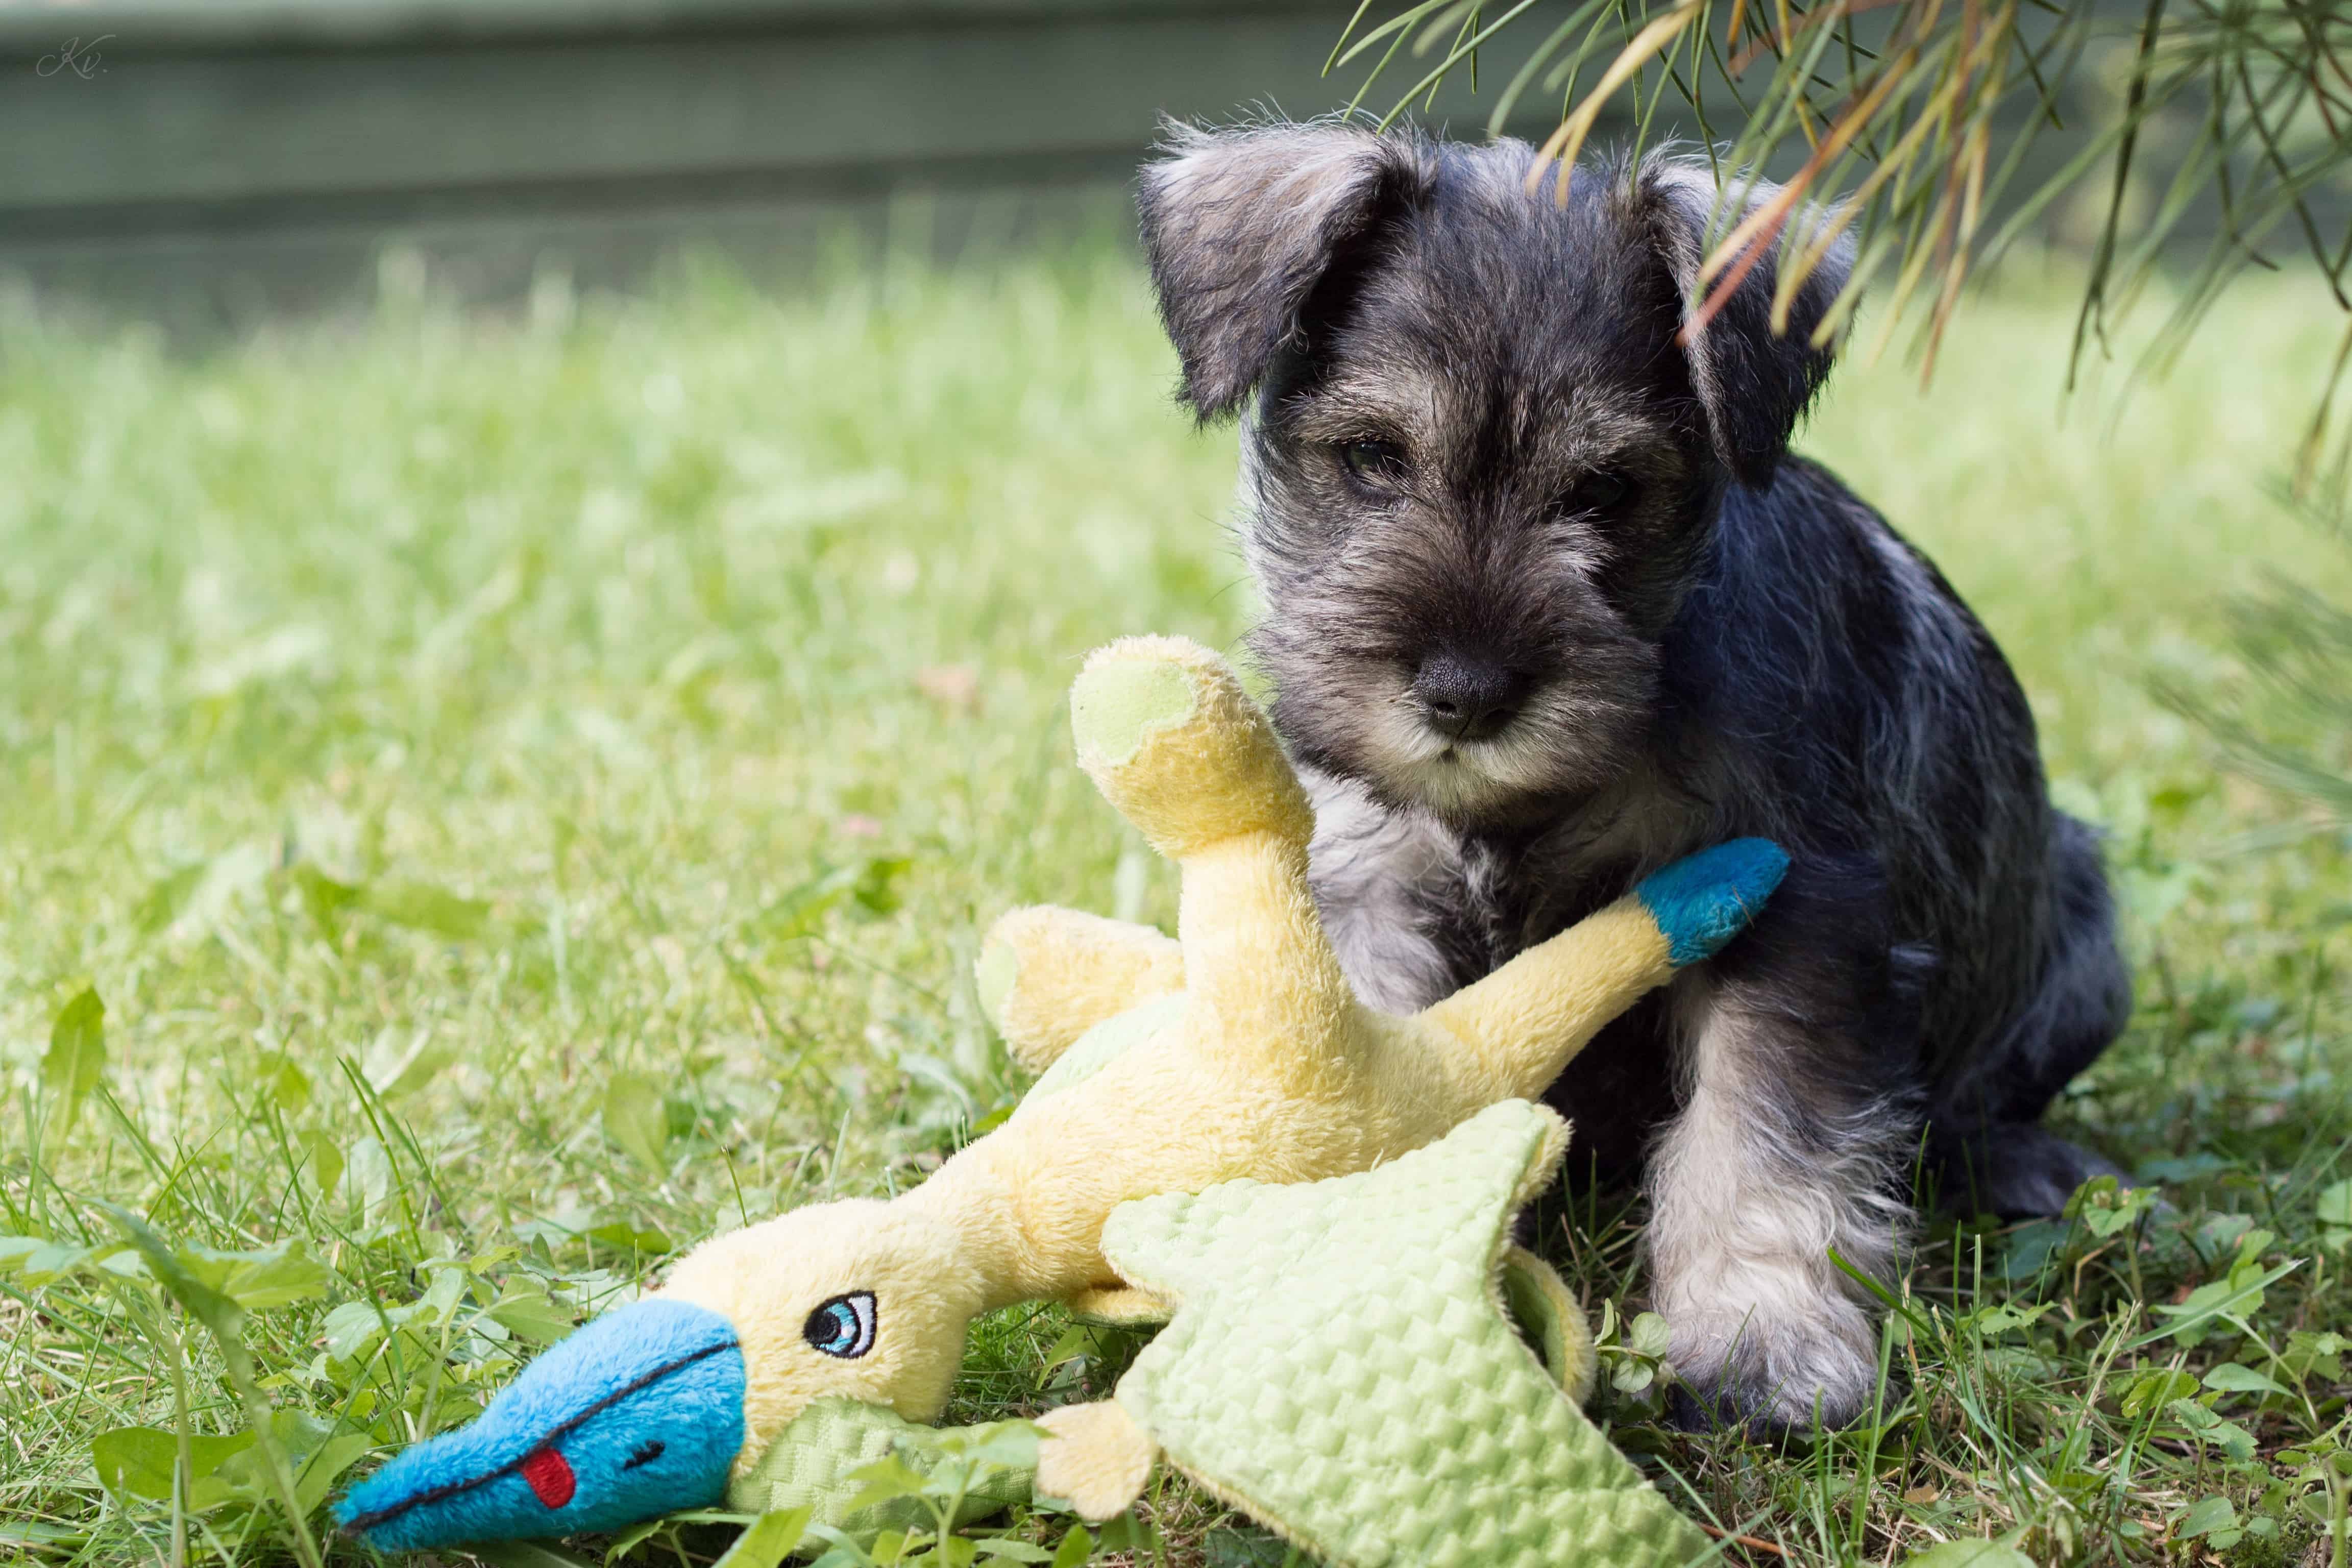 Cute Schnauzer Dog Playing With a Toy